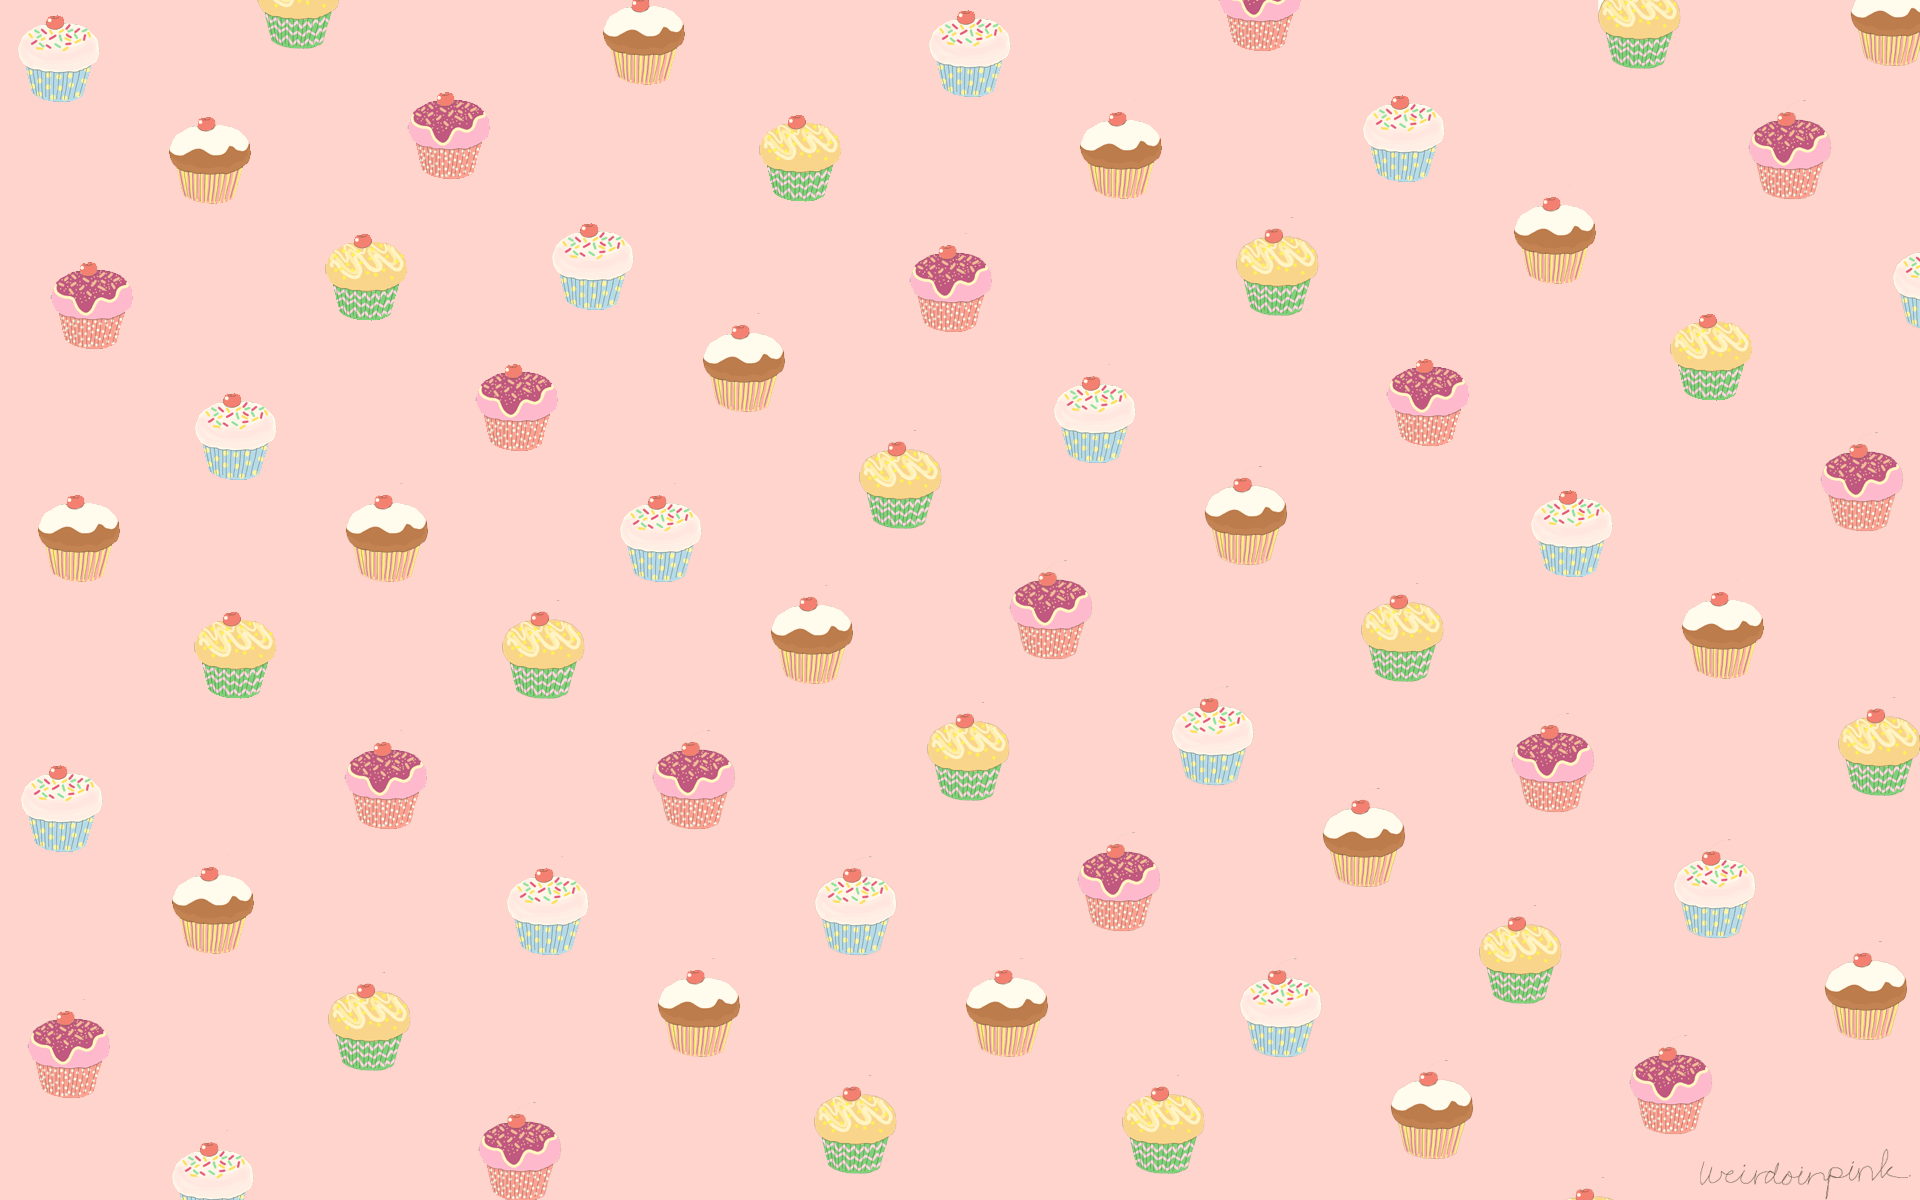 A pattern of cupcakes on a pink background - Cupcakes